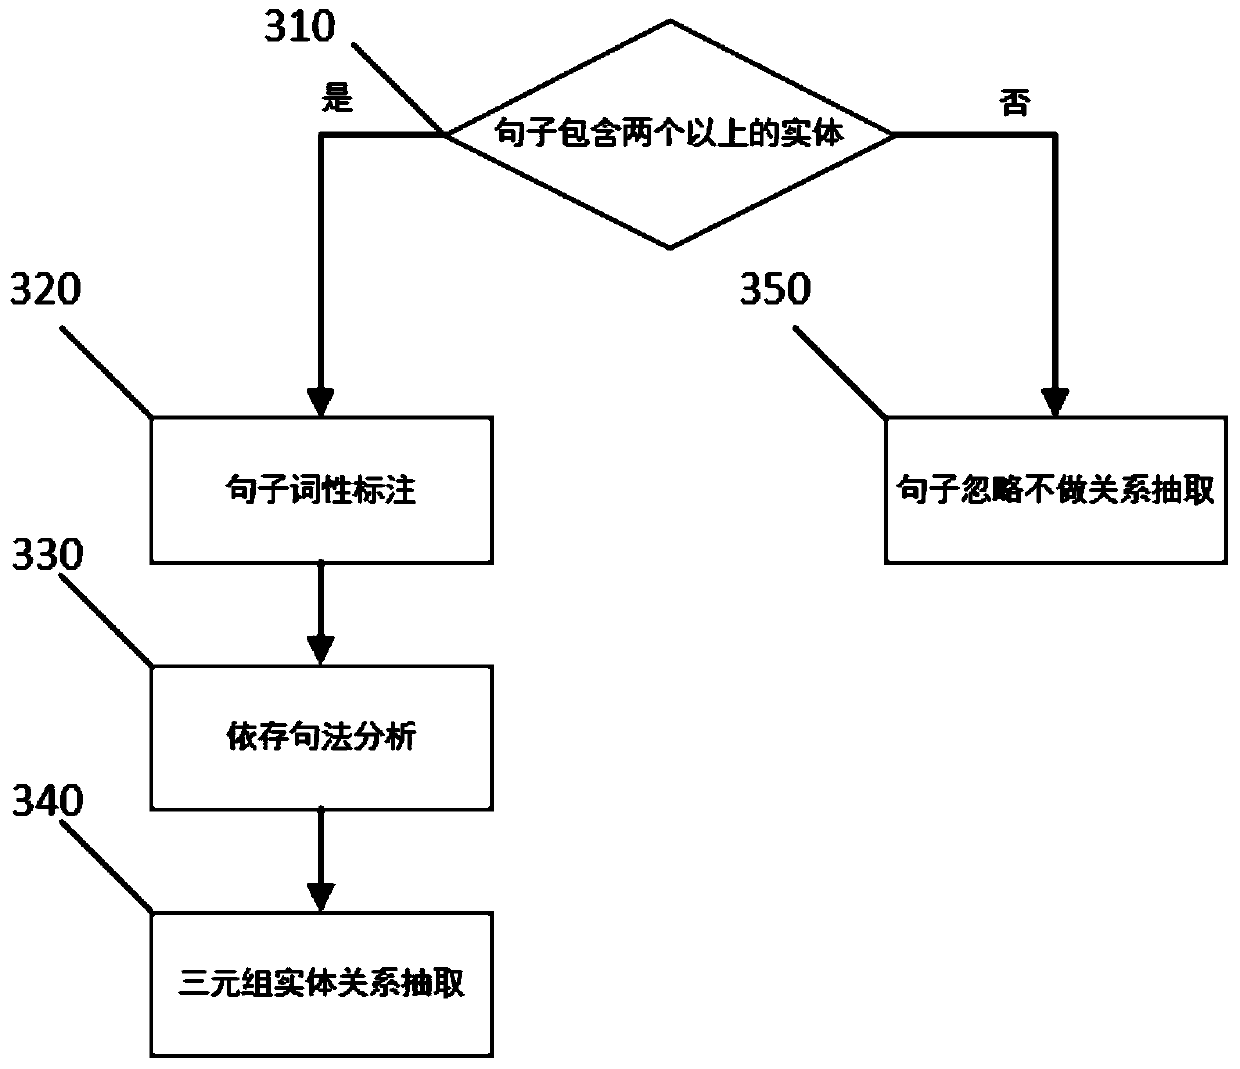 A judicial case event tree construction system and method